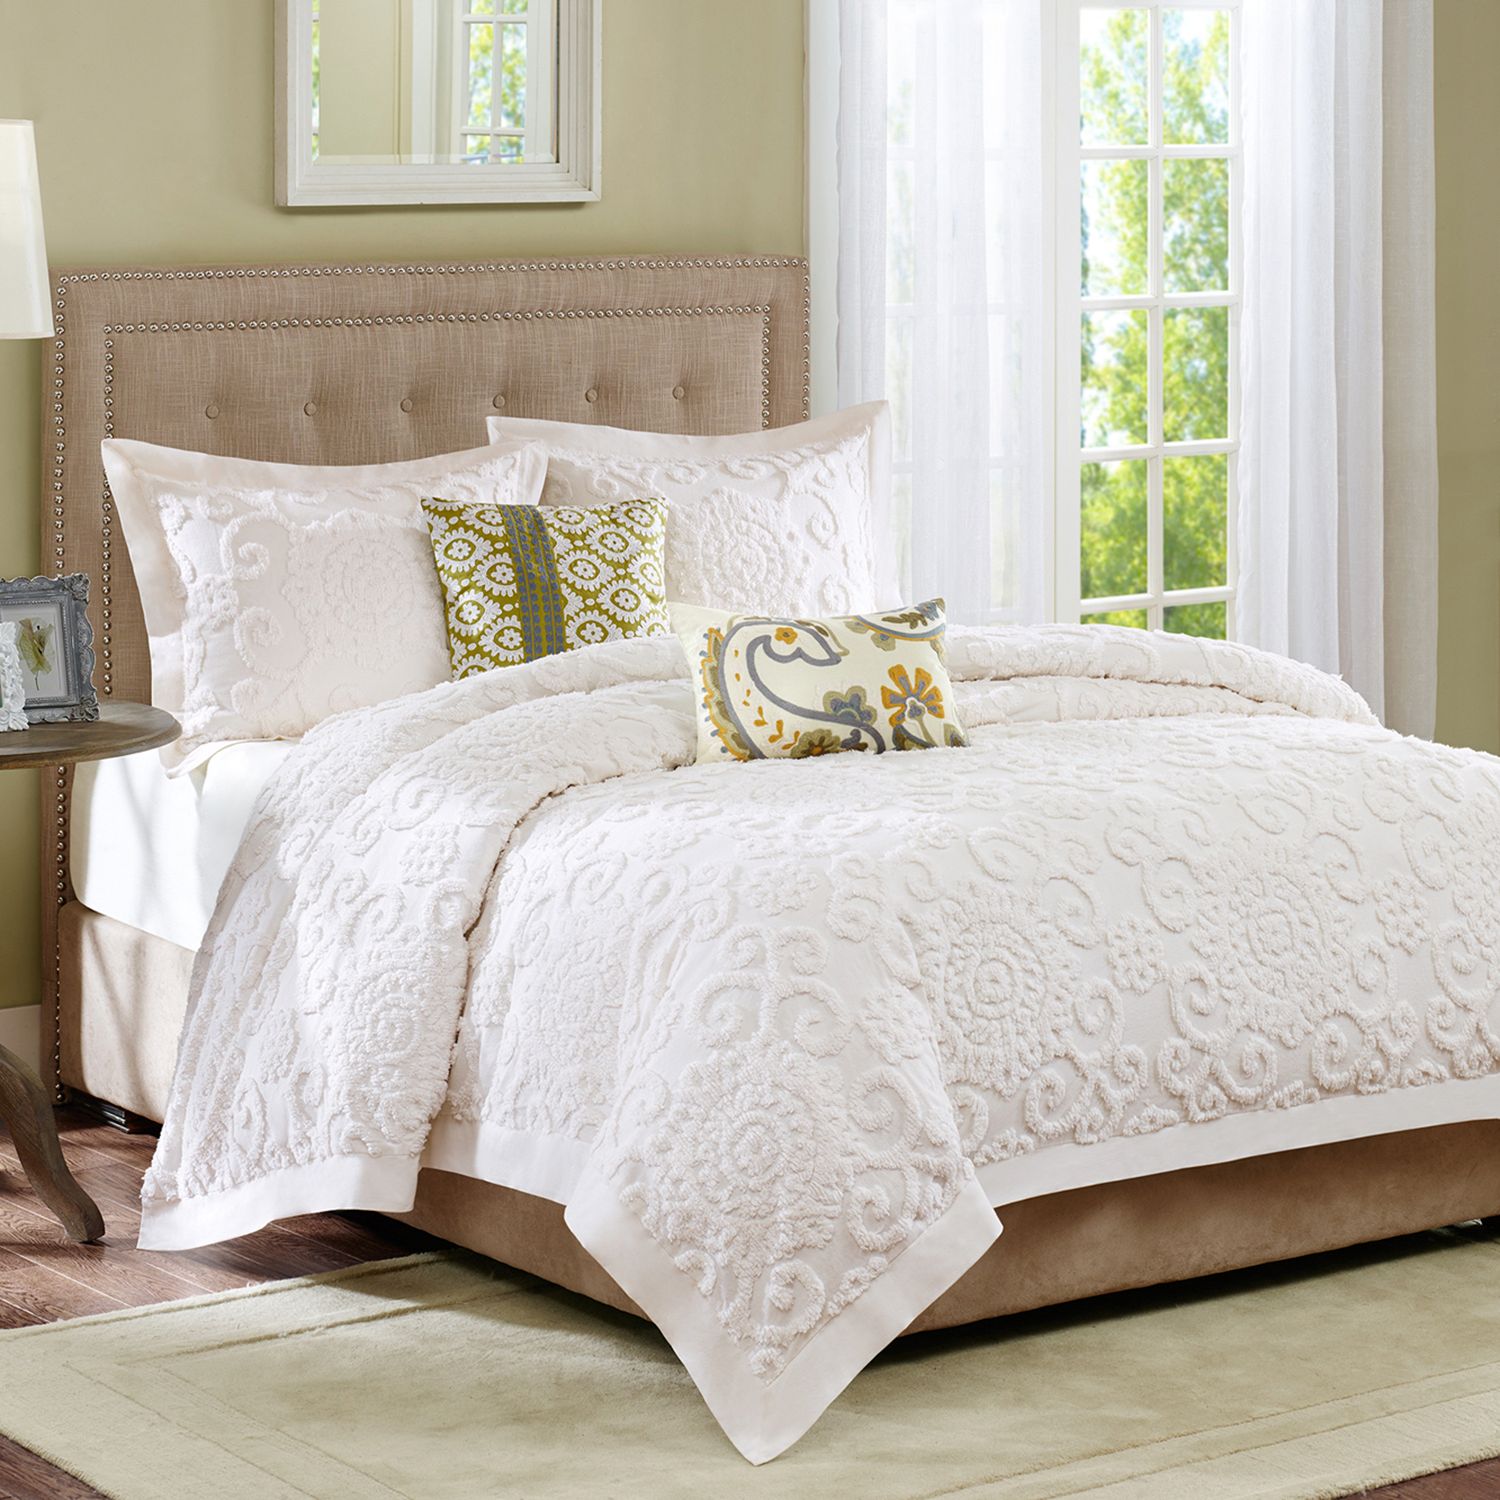 Image for Harbor House Suzanna Bedding Collection at Kohl's.